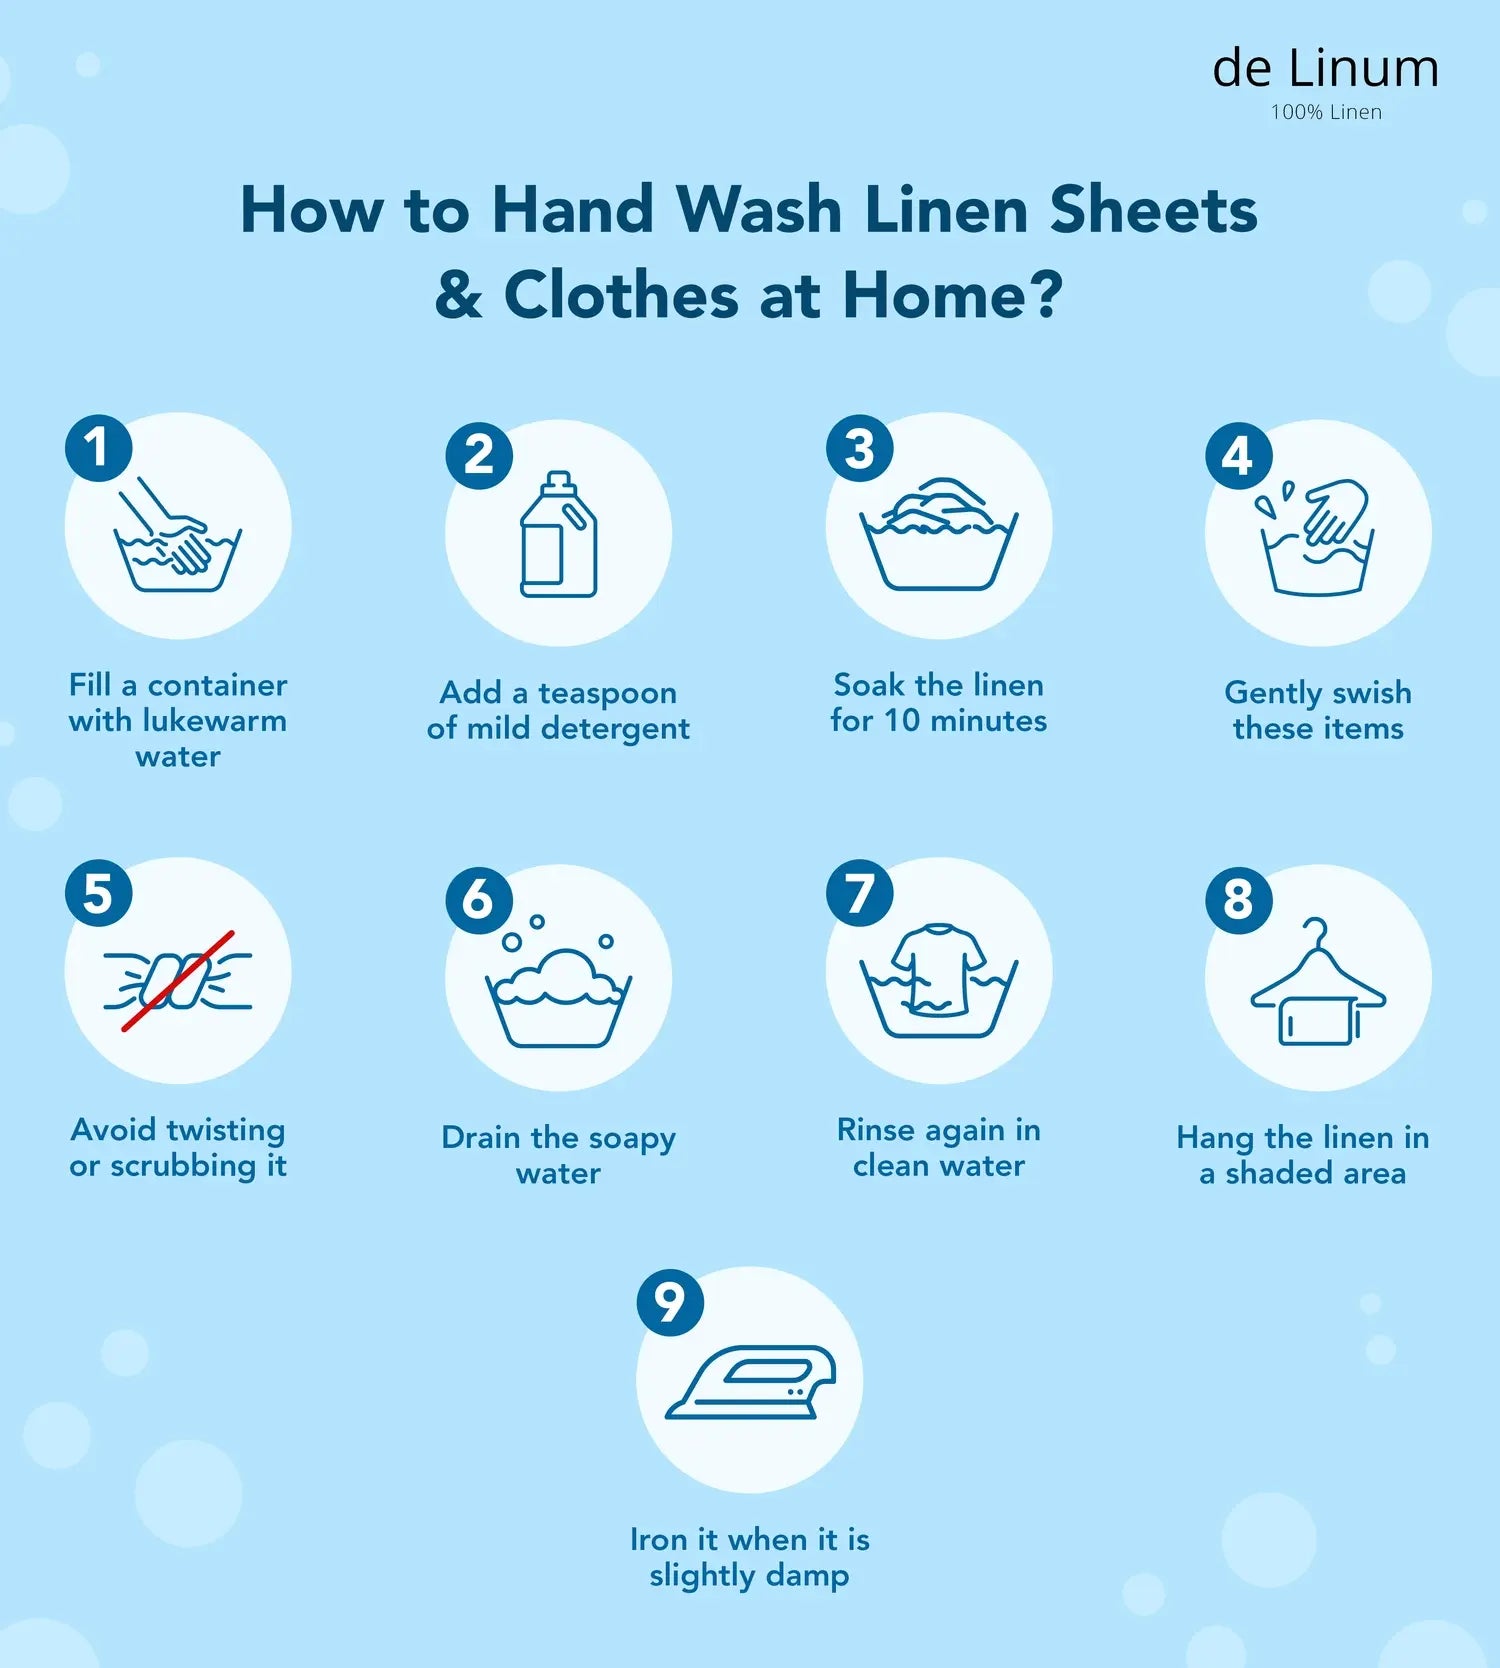 How to Wash Linen Sheets & Clothes by Hand at Home? : This includes Filling a container with lukewarm water to the final step of ironing linen clothes.